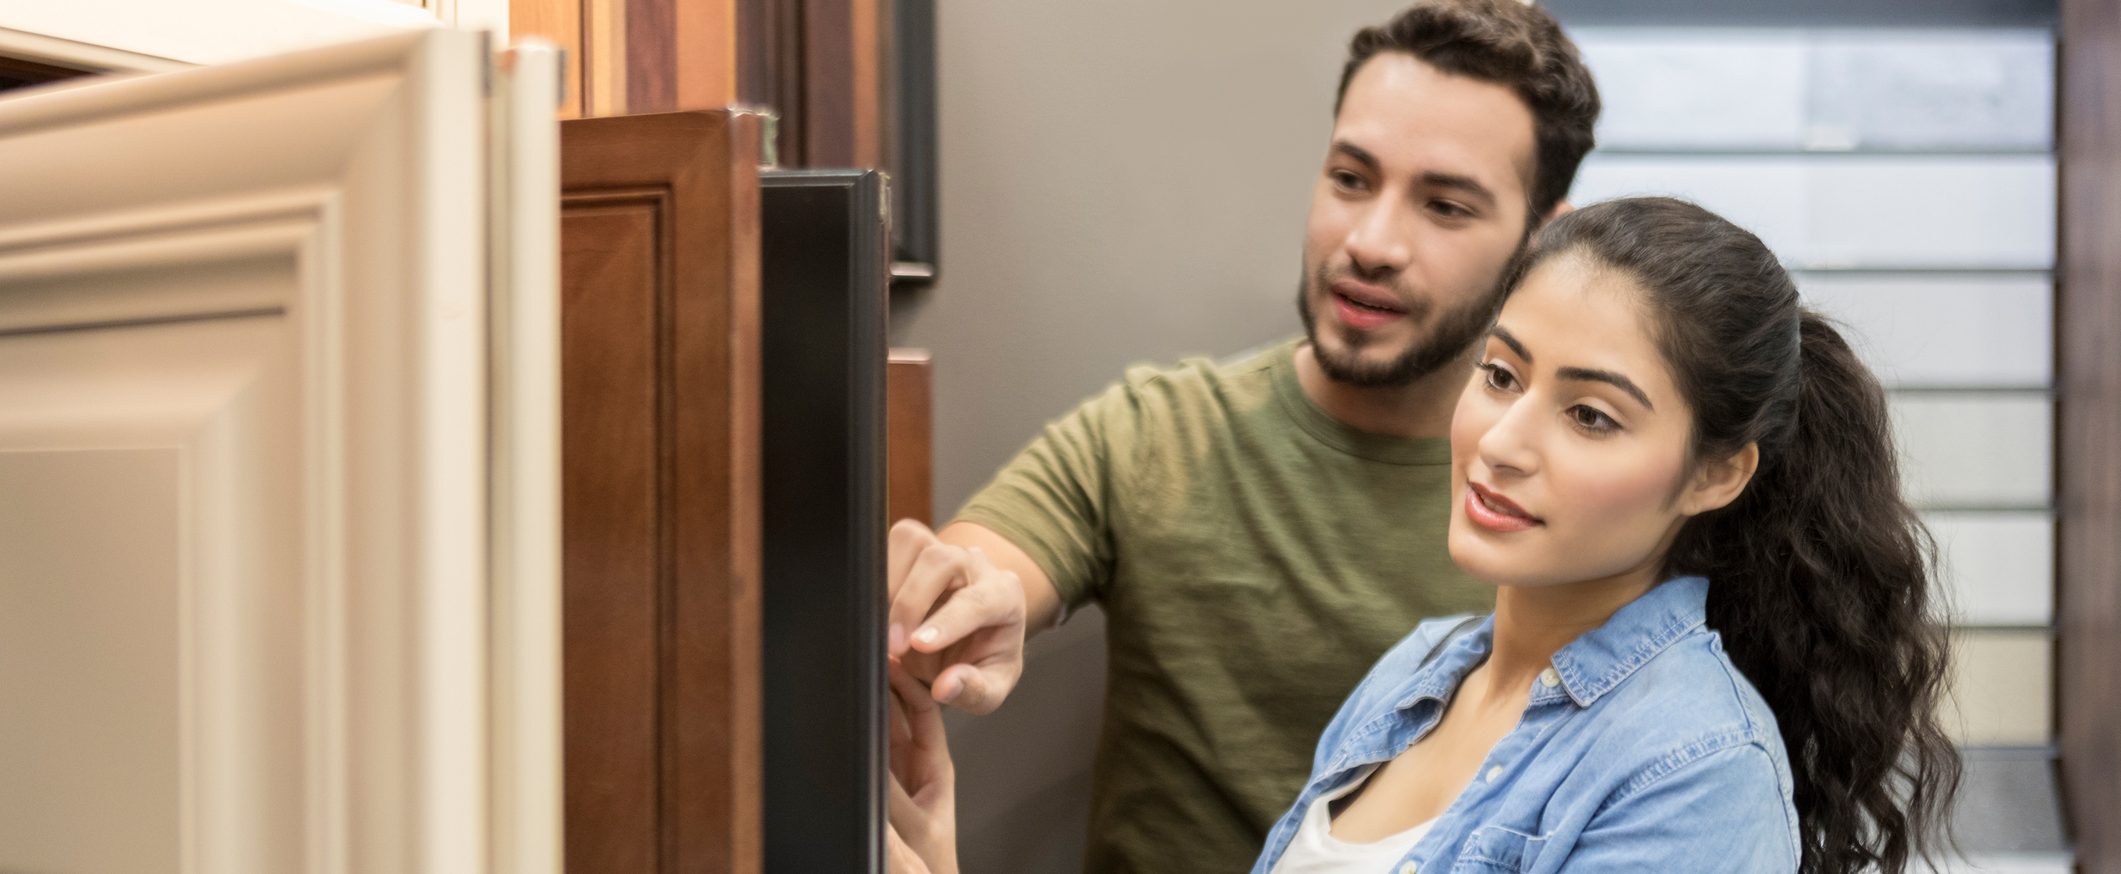 Two people browse cabinet doors in an interior design store.